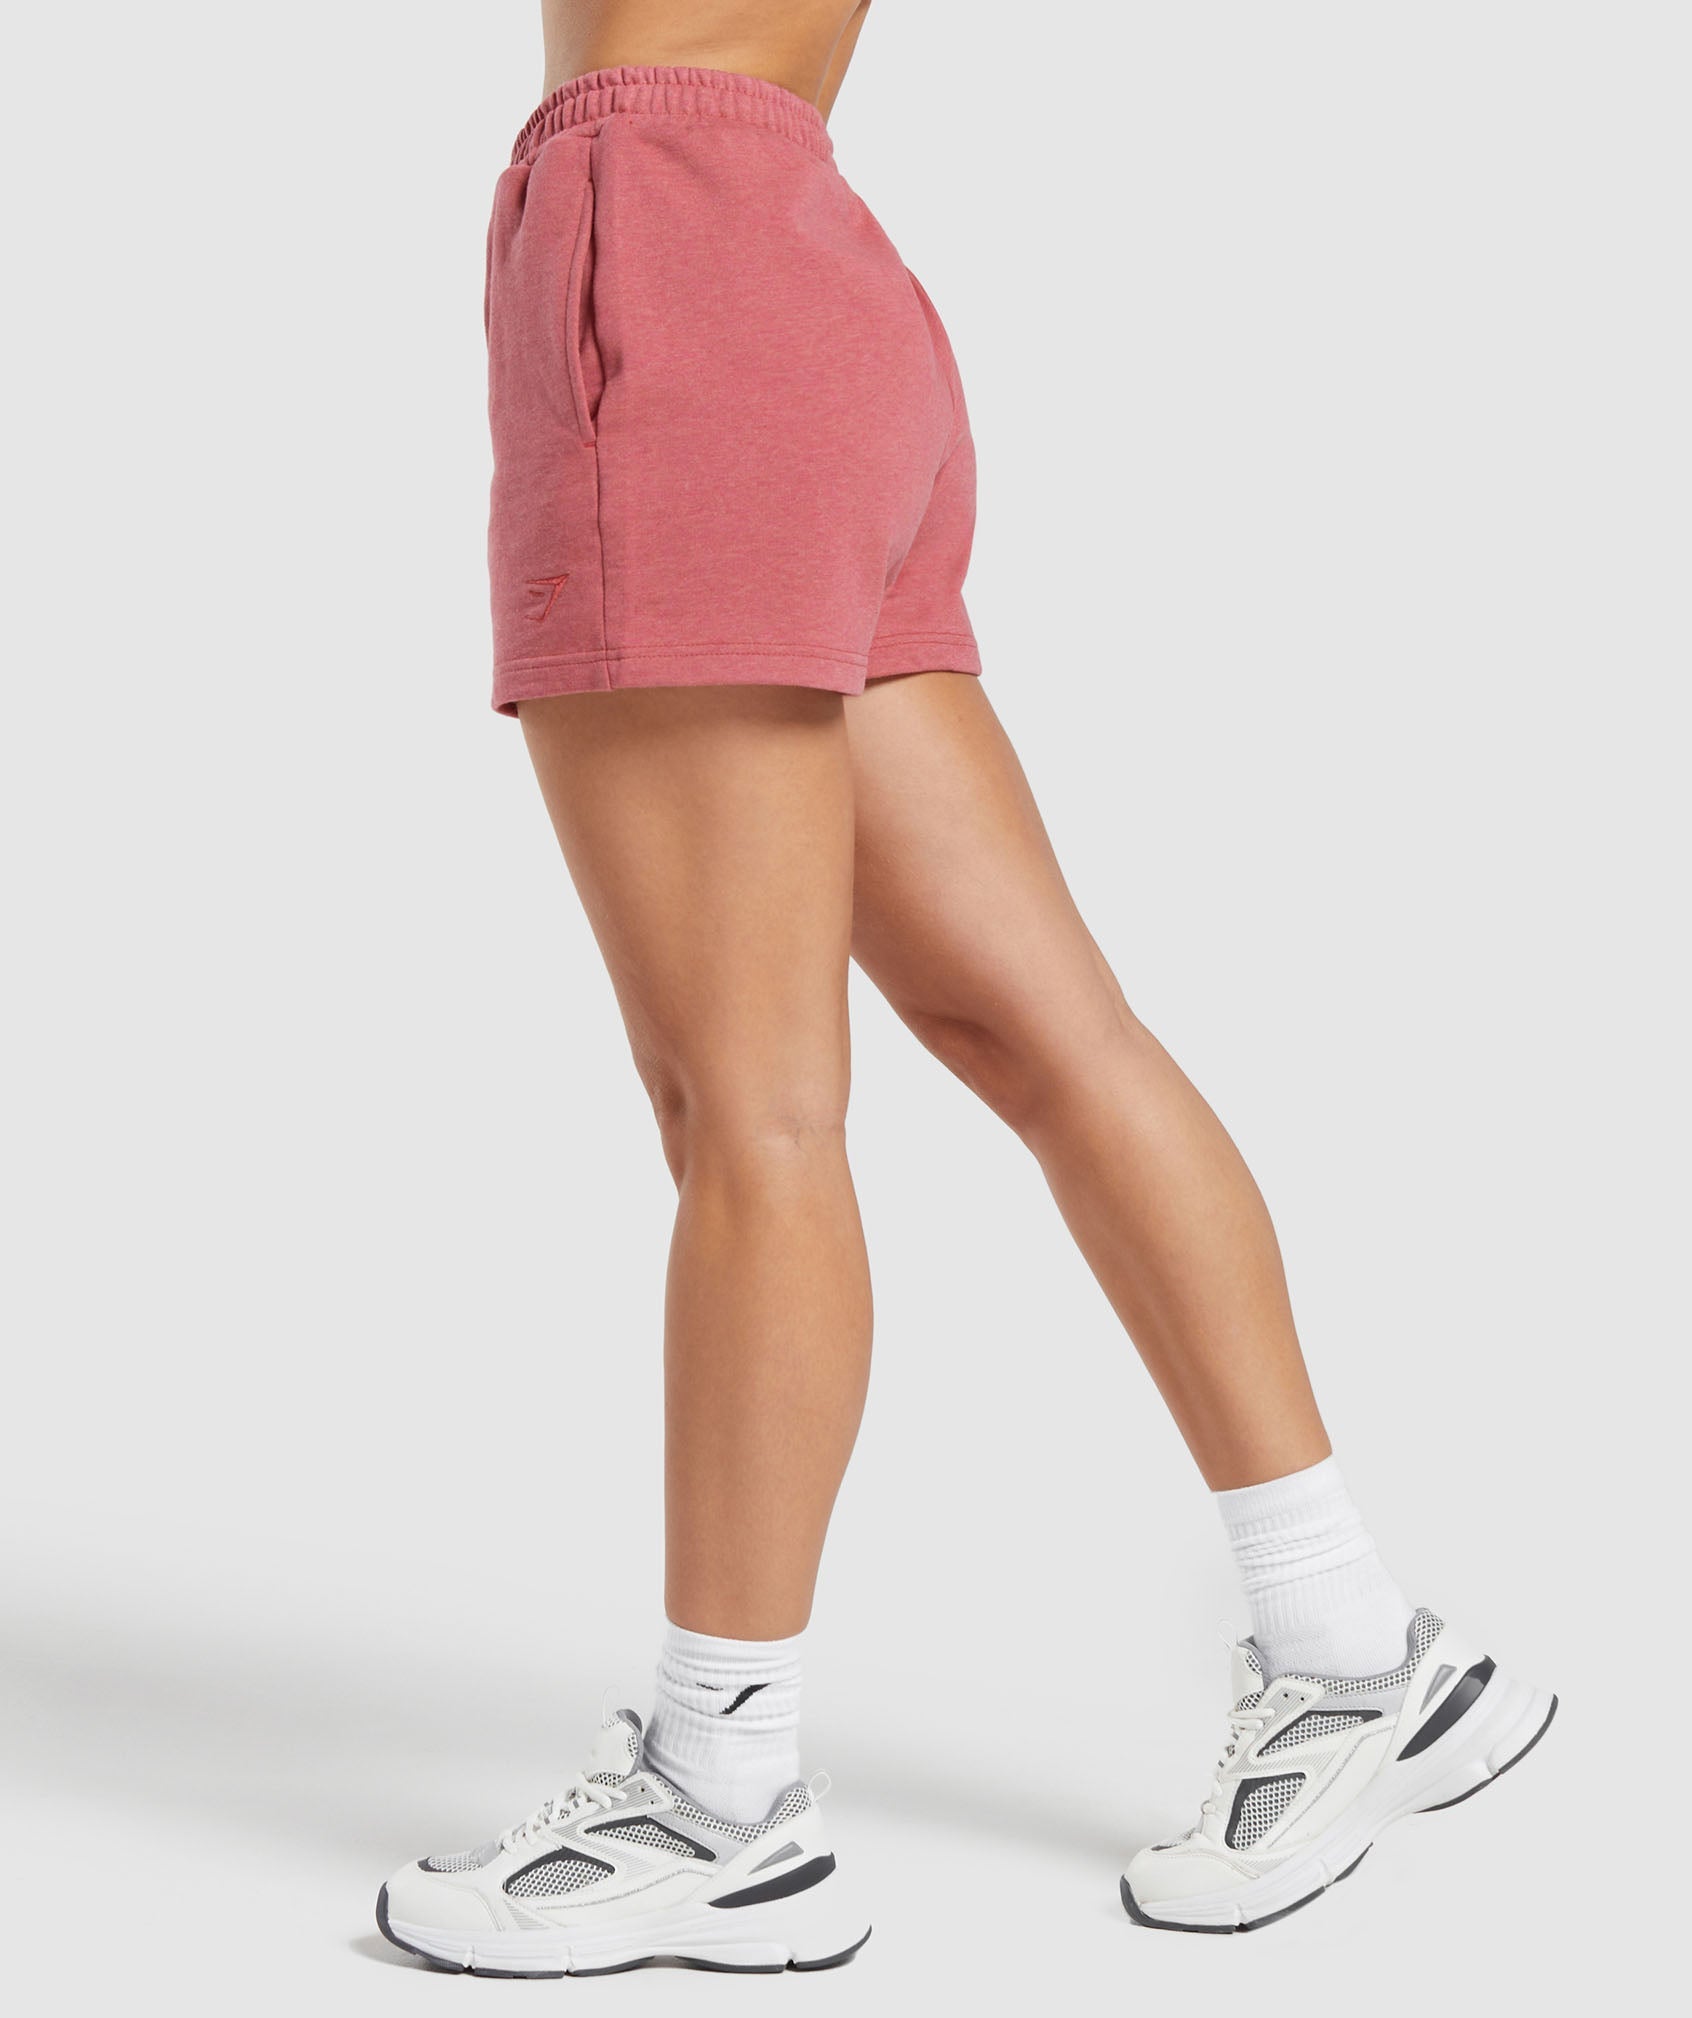 Rest Day Sweat Shorts in Heritage Pink Marl - view 3